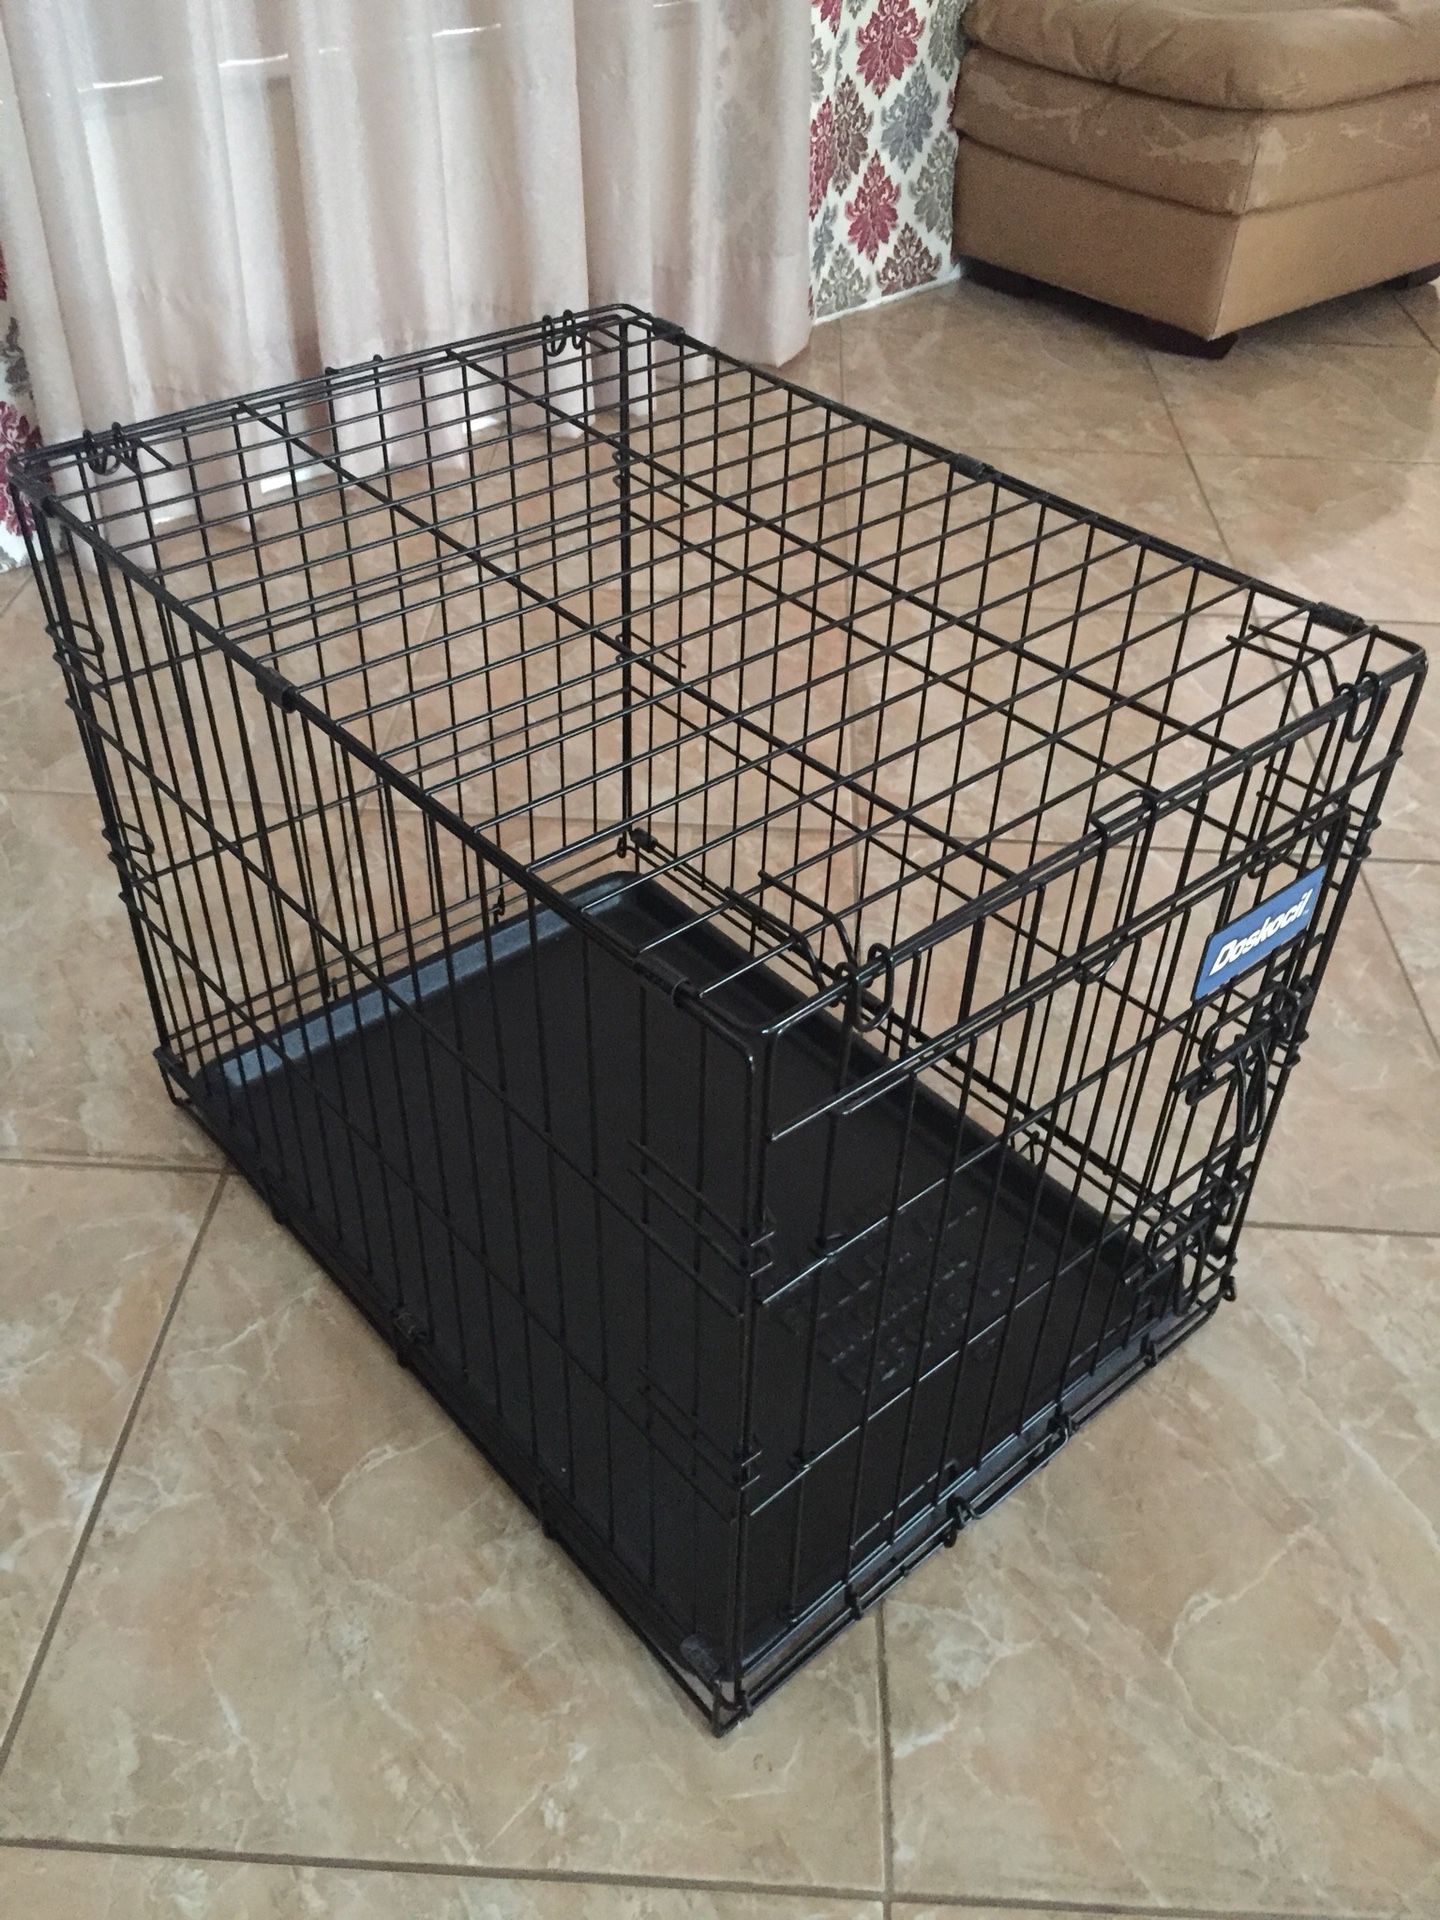 24 inch Puppy/small dog crate in new condition